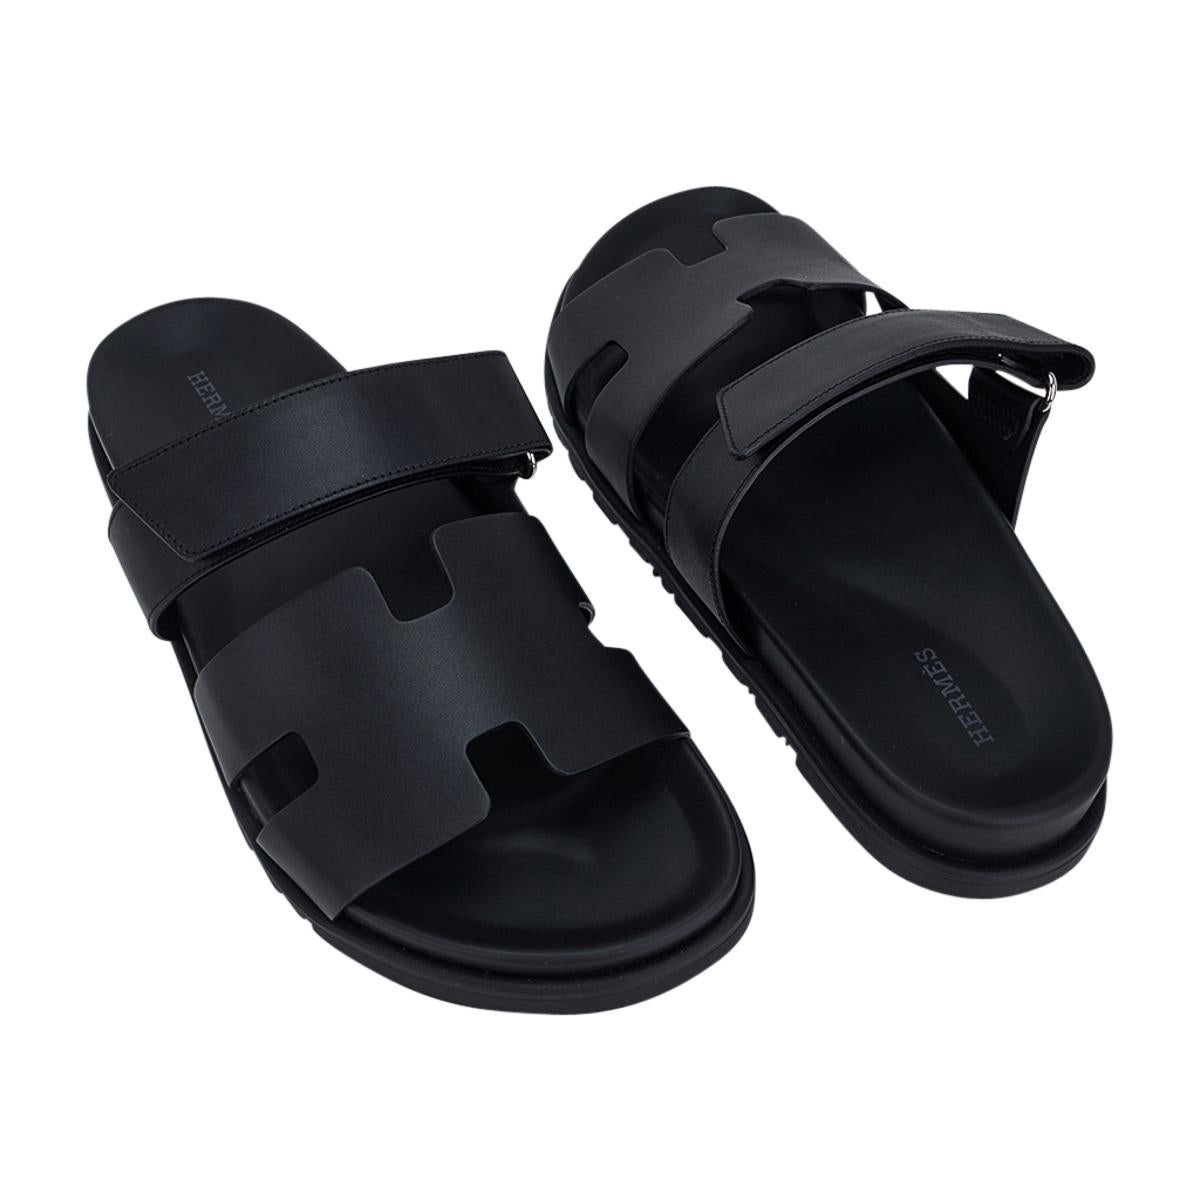 Hermes Men's Chypre Black Calfskin Leather Sandal 43 / 10 In New Condition For Sale In Miami, FL